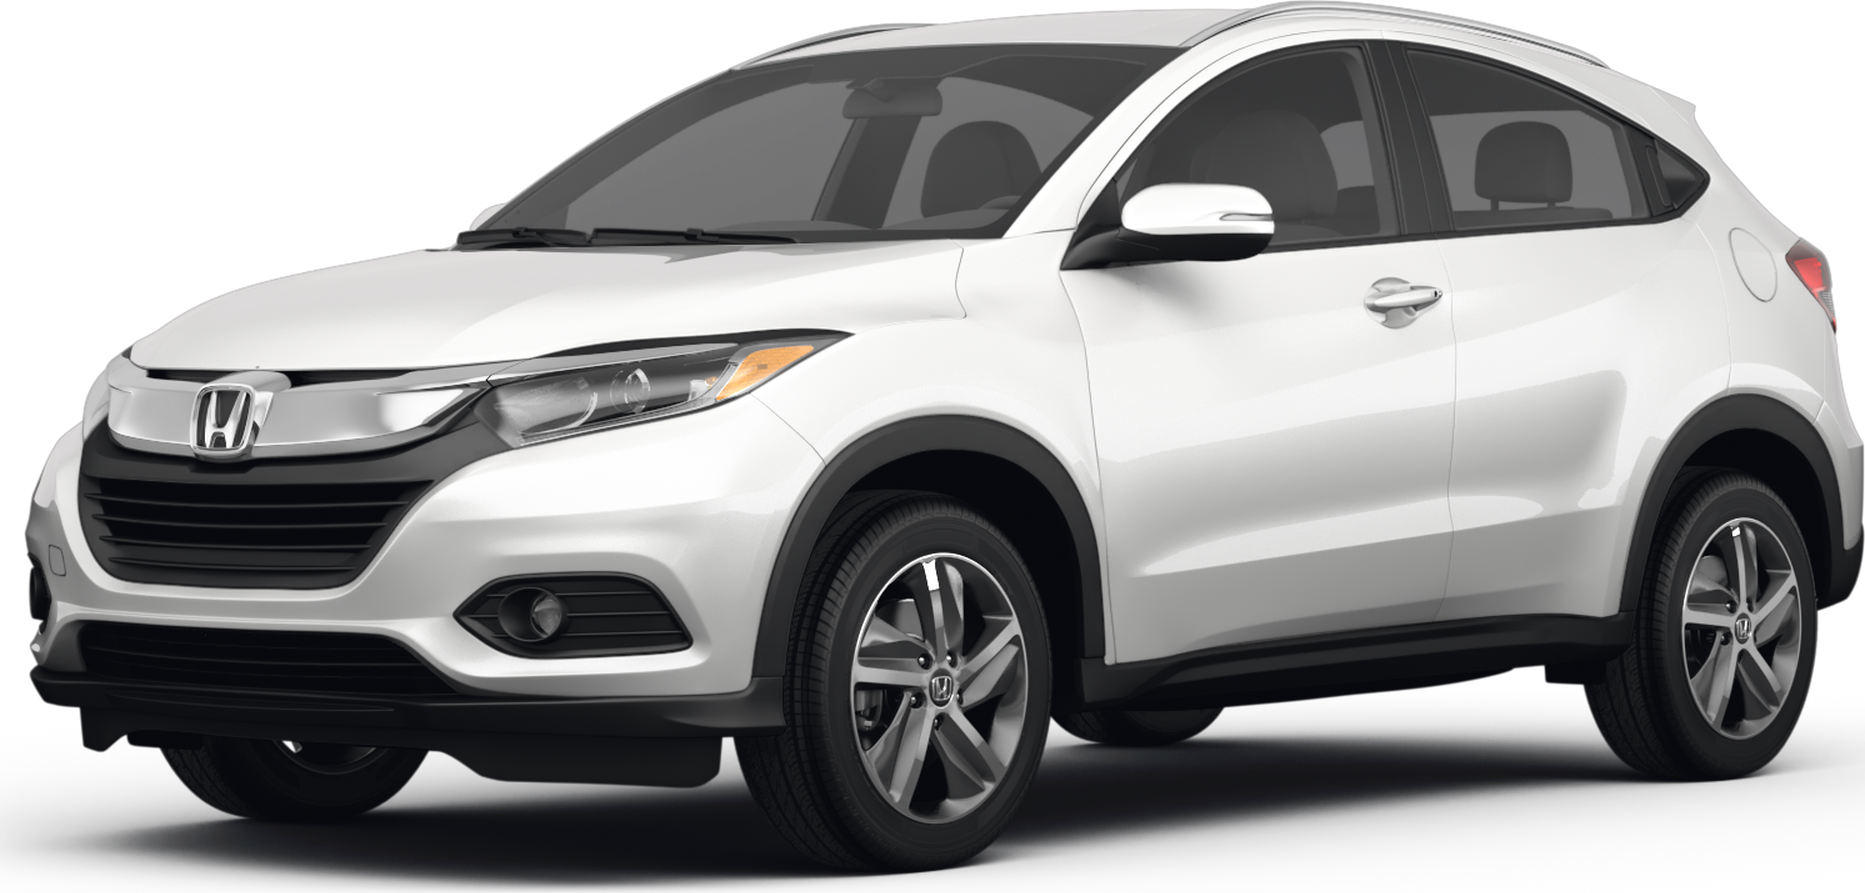 2022 Honda HR-V price and specs: Base price up $5400, to $36,700 drive-away  - Drive